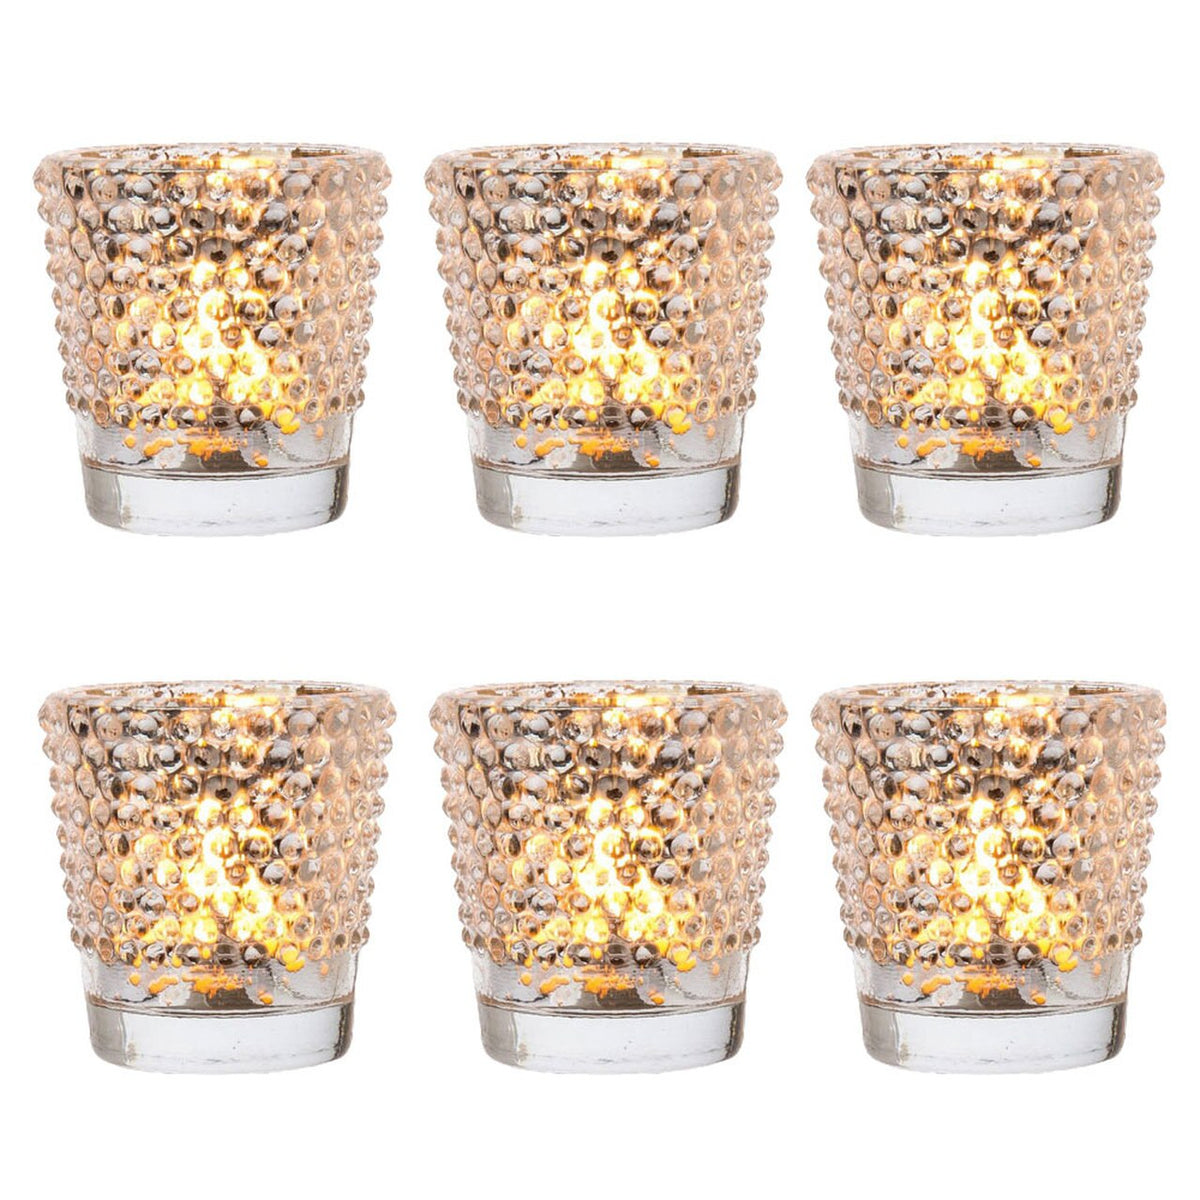 6 Pack | Hobnail Vintage Mercury Glass Glass Candle Holders (2.5-Inch, Candace Design, Silver) - For Use with Tea Lights - For Home Decor, Parties, and Wedding Decorations - PaperLanternStore.com - Paper Lanterns, Decor, Party Lights &amp; More